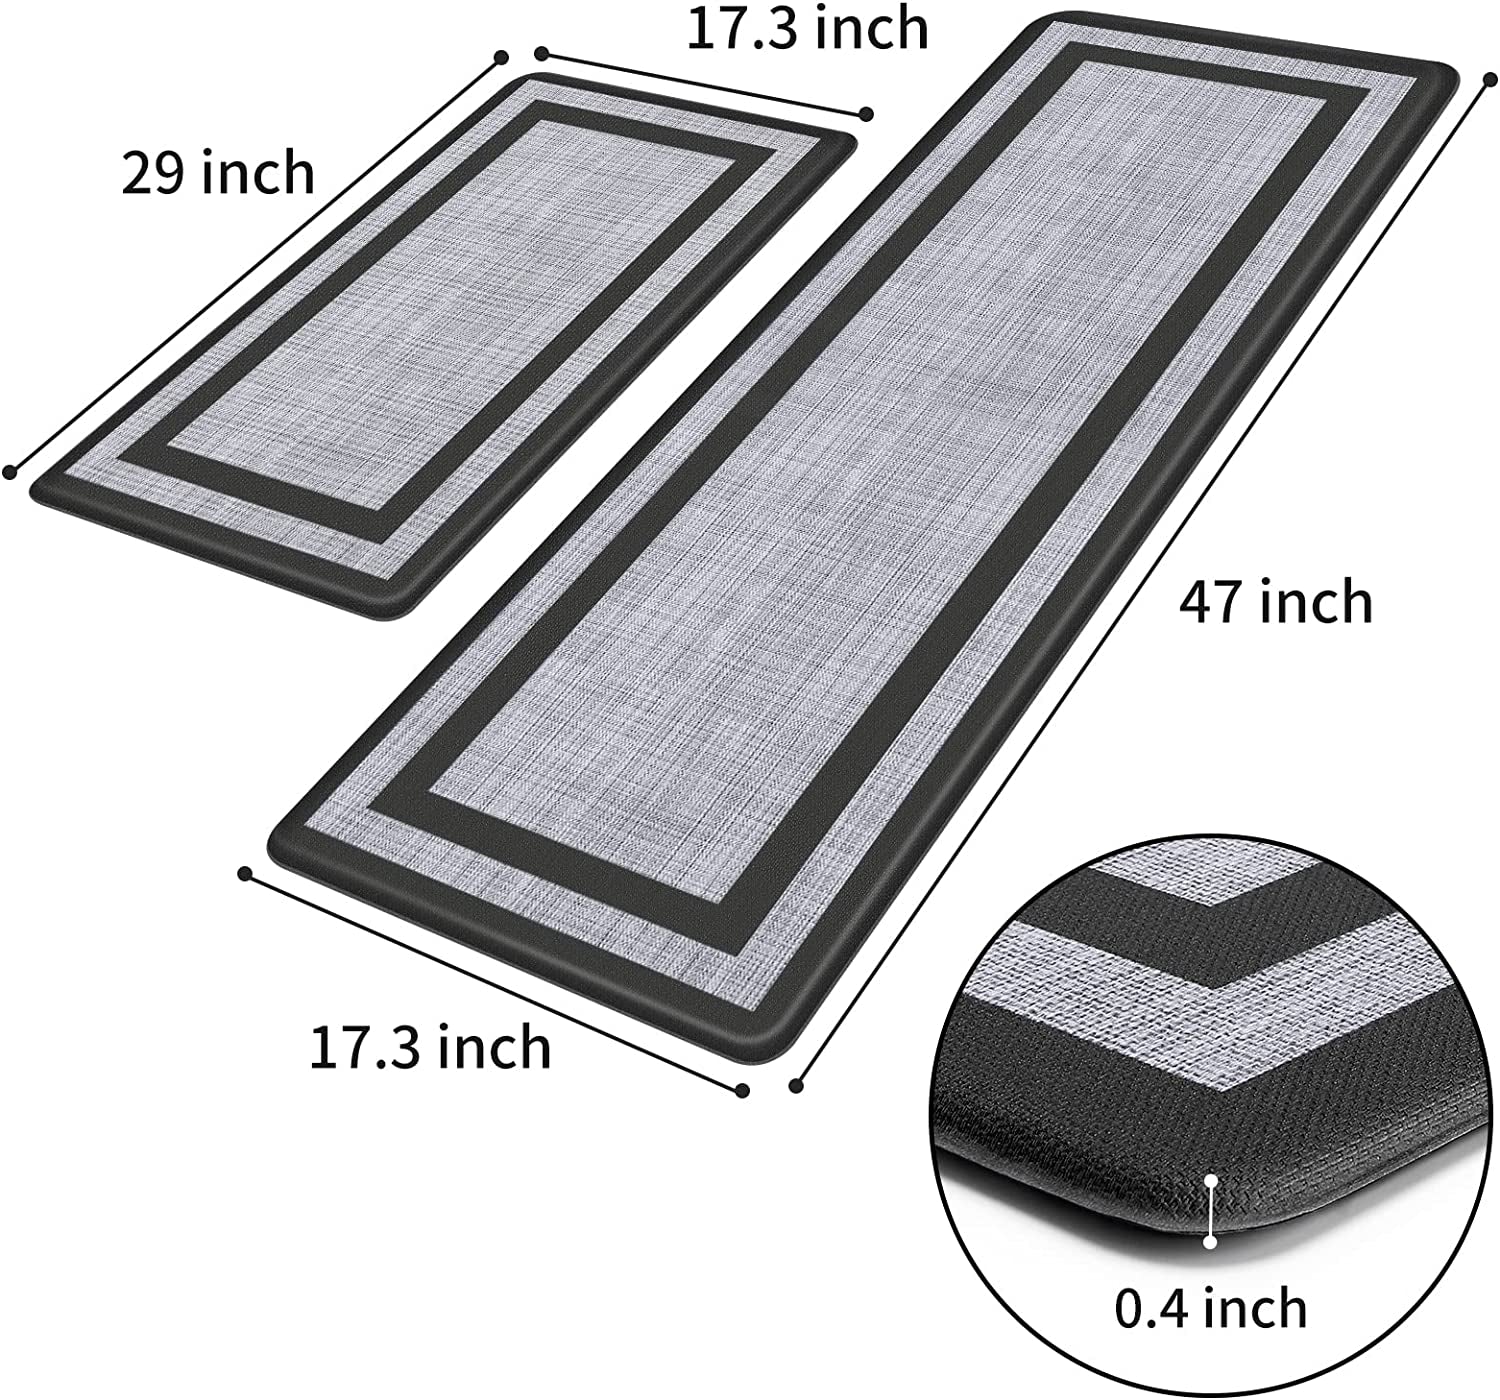 Kitchen Mat [2 PCS] Cushioned Anti-Fatigue Non-Skid Waterproof Rugs Ergonomic Comfort Standing Mat for Kitchen, Floor, Office, Sink, Laundry, Black and Gray